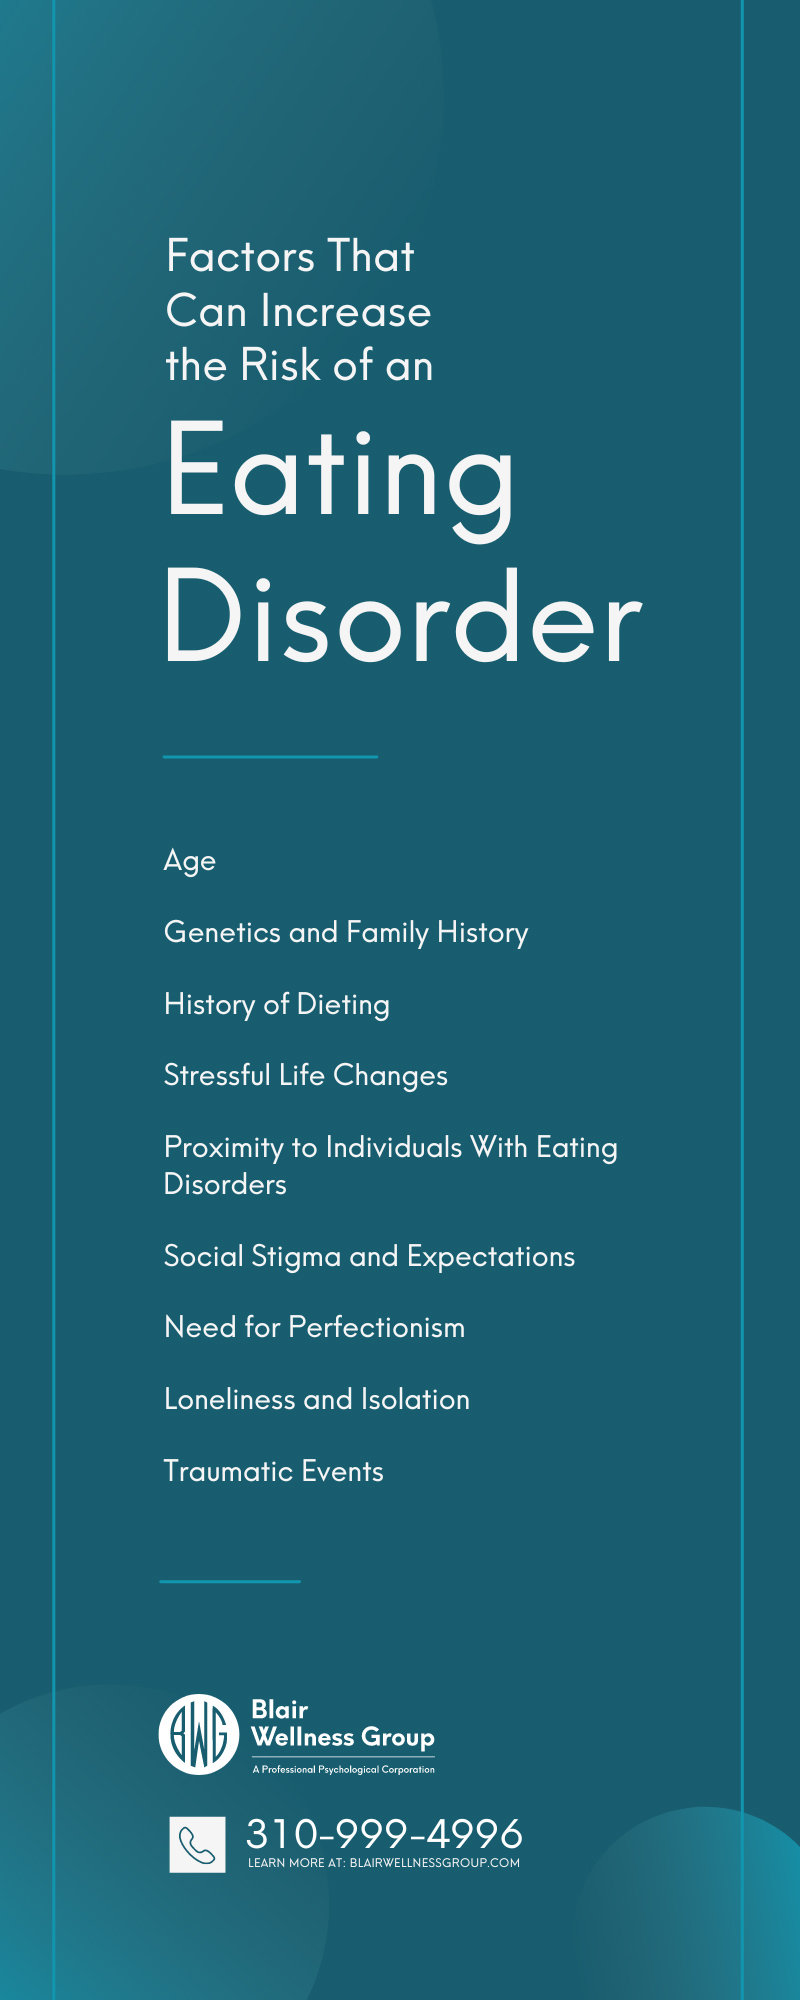 Factors That Can Increase the Risk of an Eating Disorder